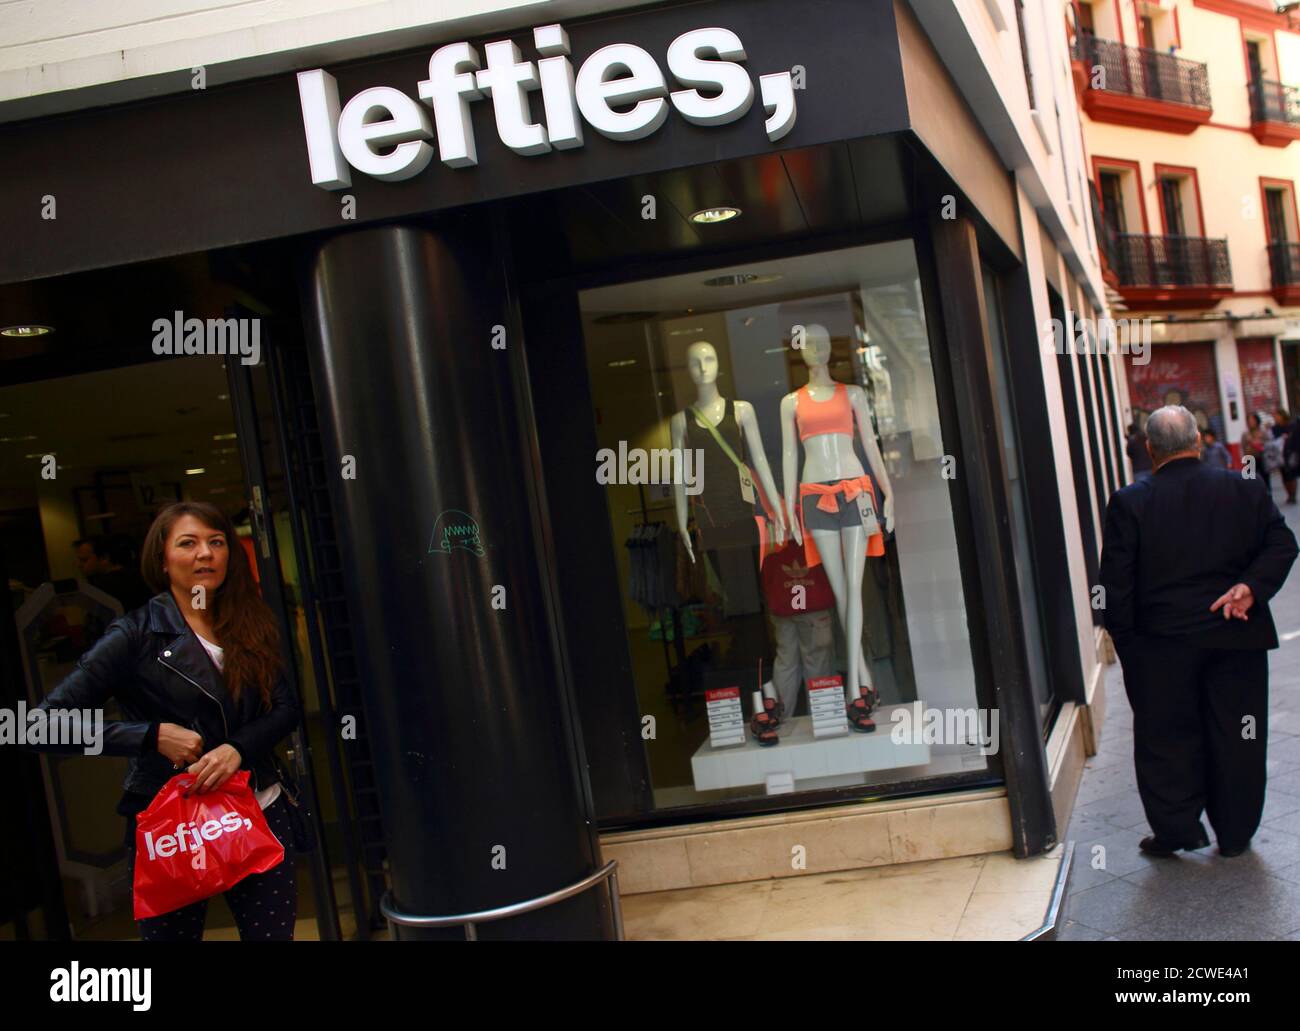 A woman leaves a Lefties store in downtown Seville, southern Spain, March  12, 2014. While Inditex's Zara and other brands have seen tepid sales  growth in Spain in recent years, the company